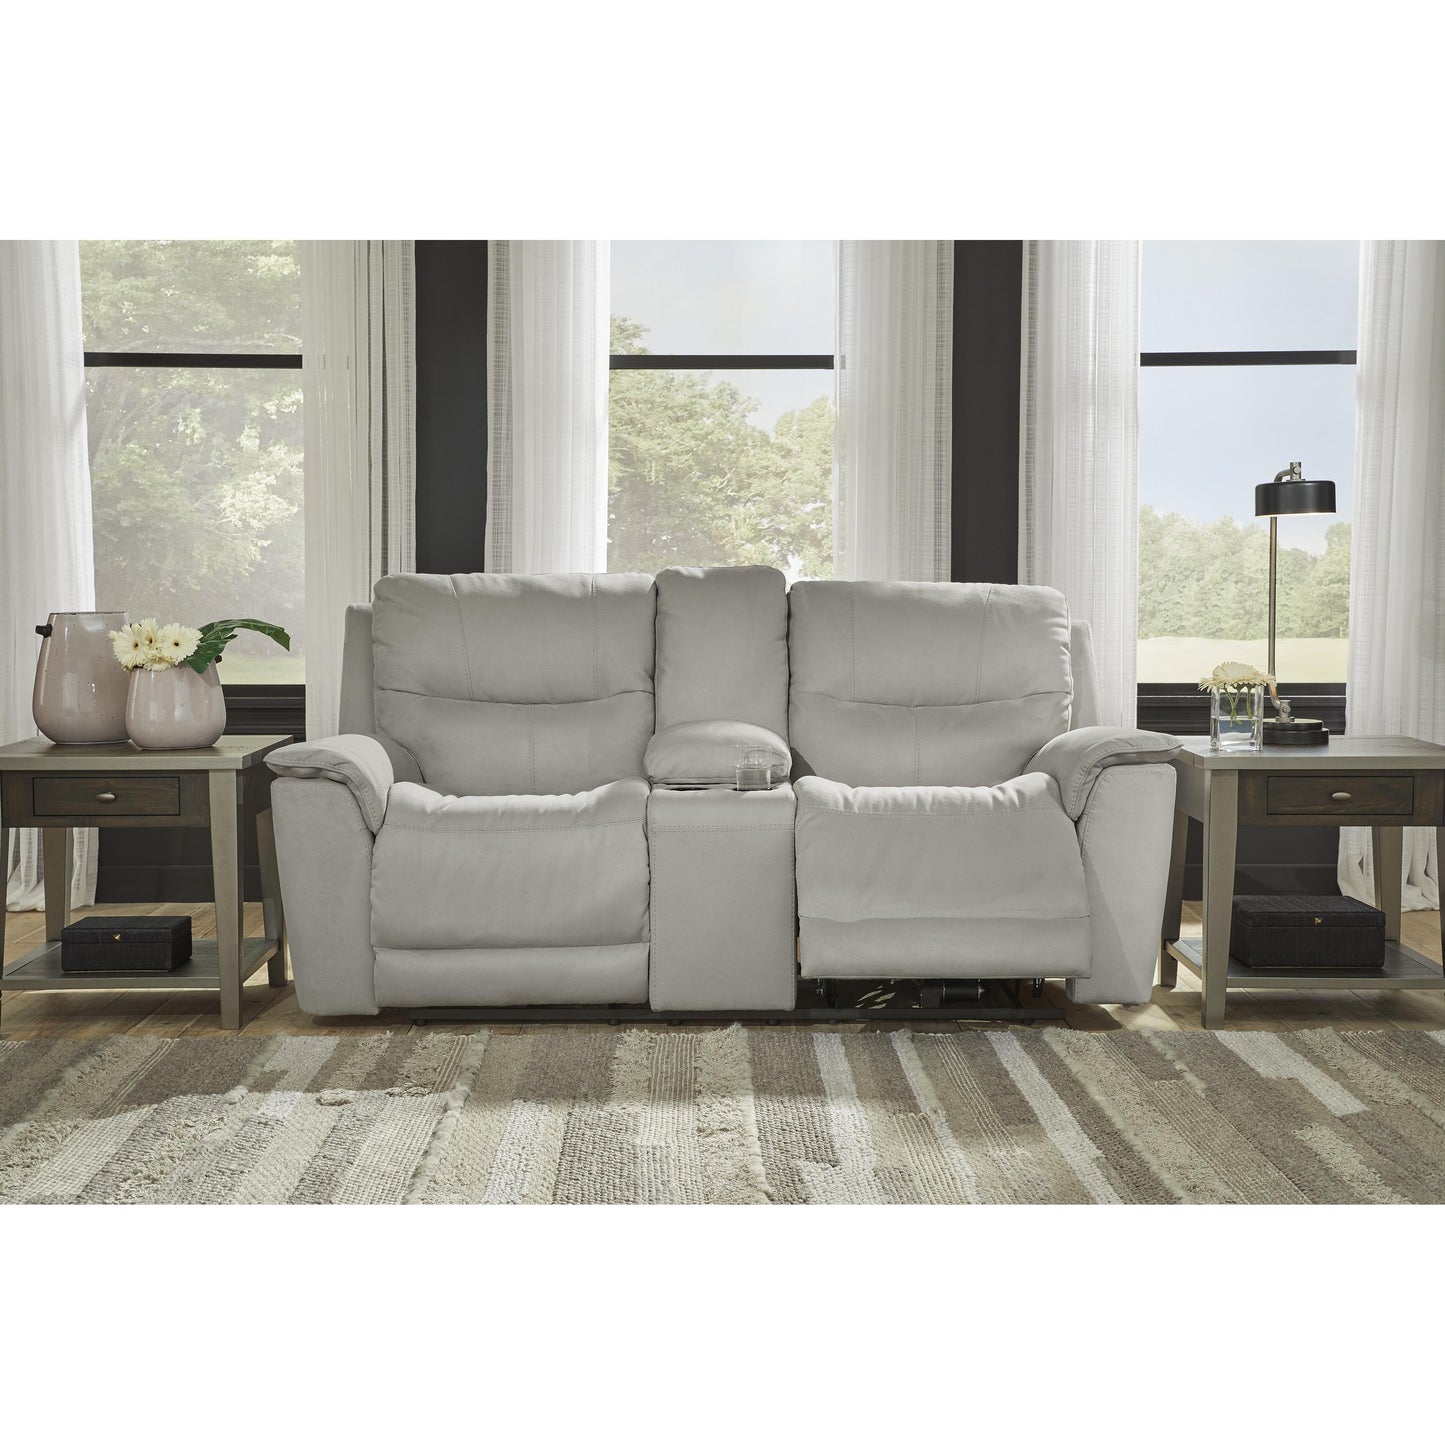 Signature Design by Ashley Next-Gen Gaucho Power Reclining Leather Look Loveseat 6080618 IMAGE 5